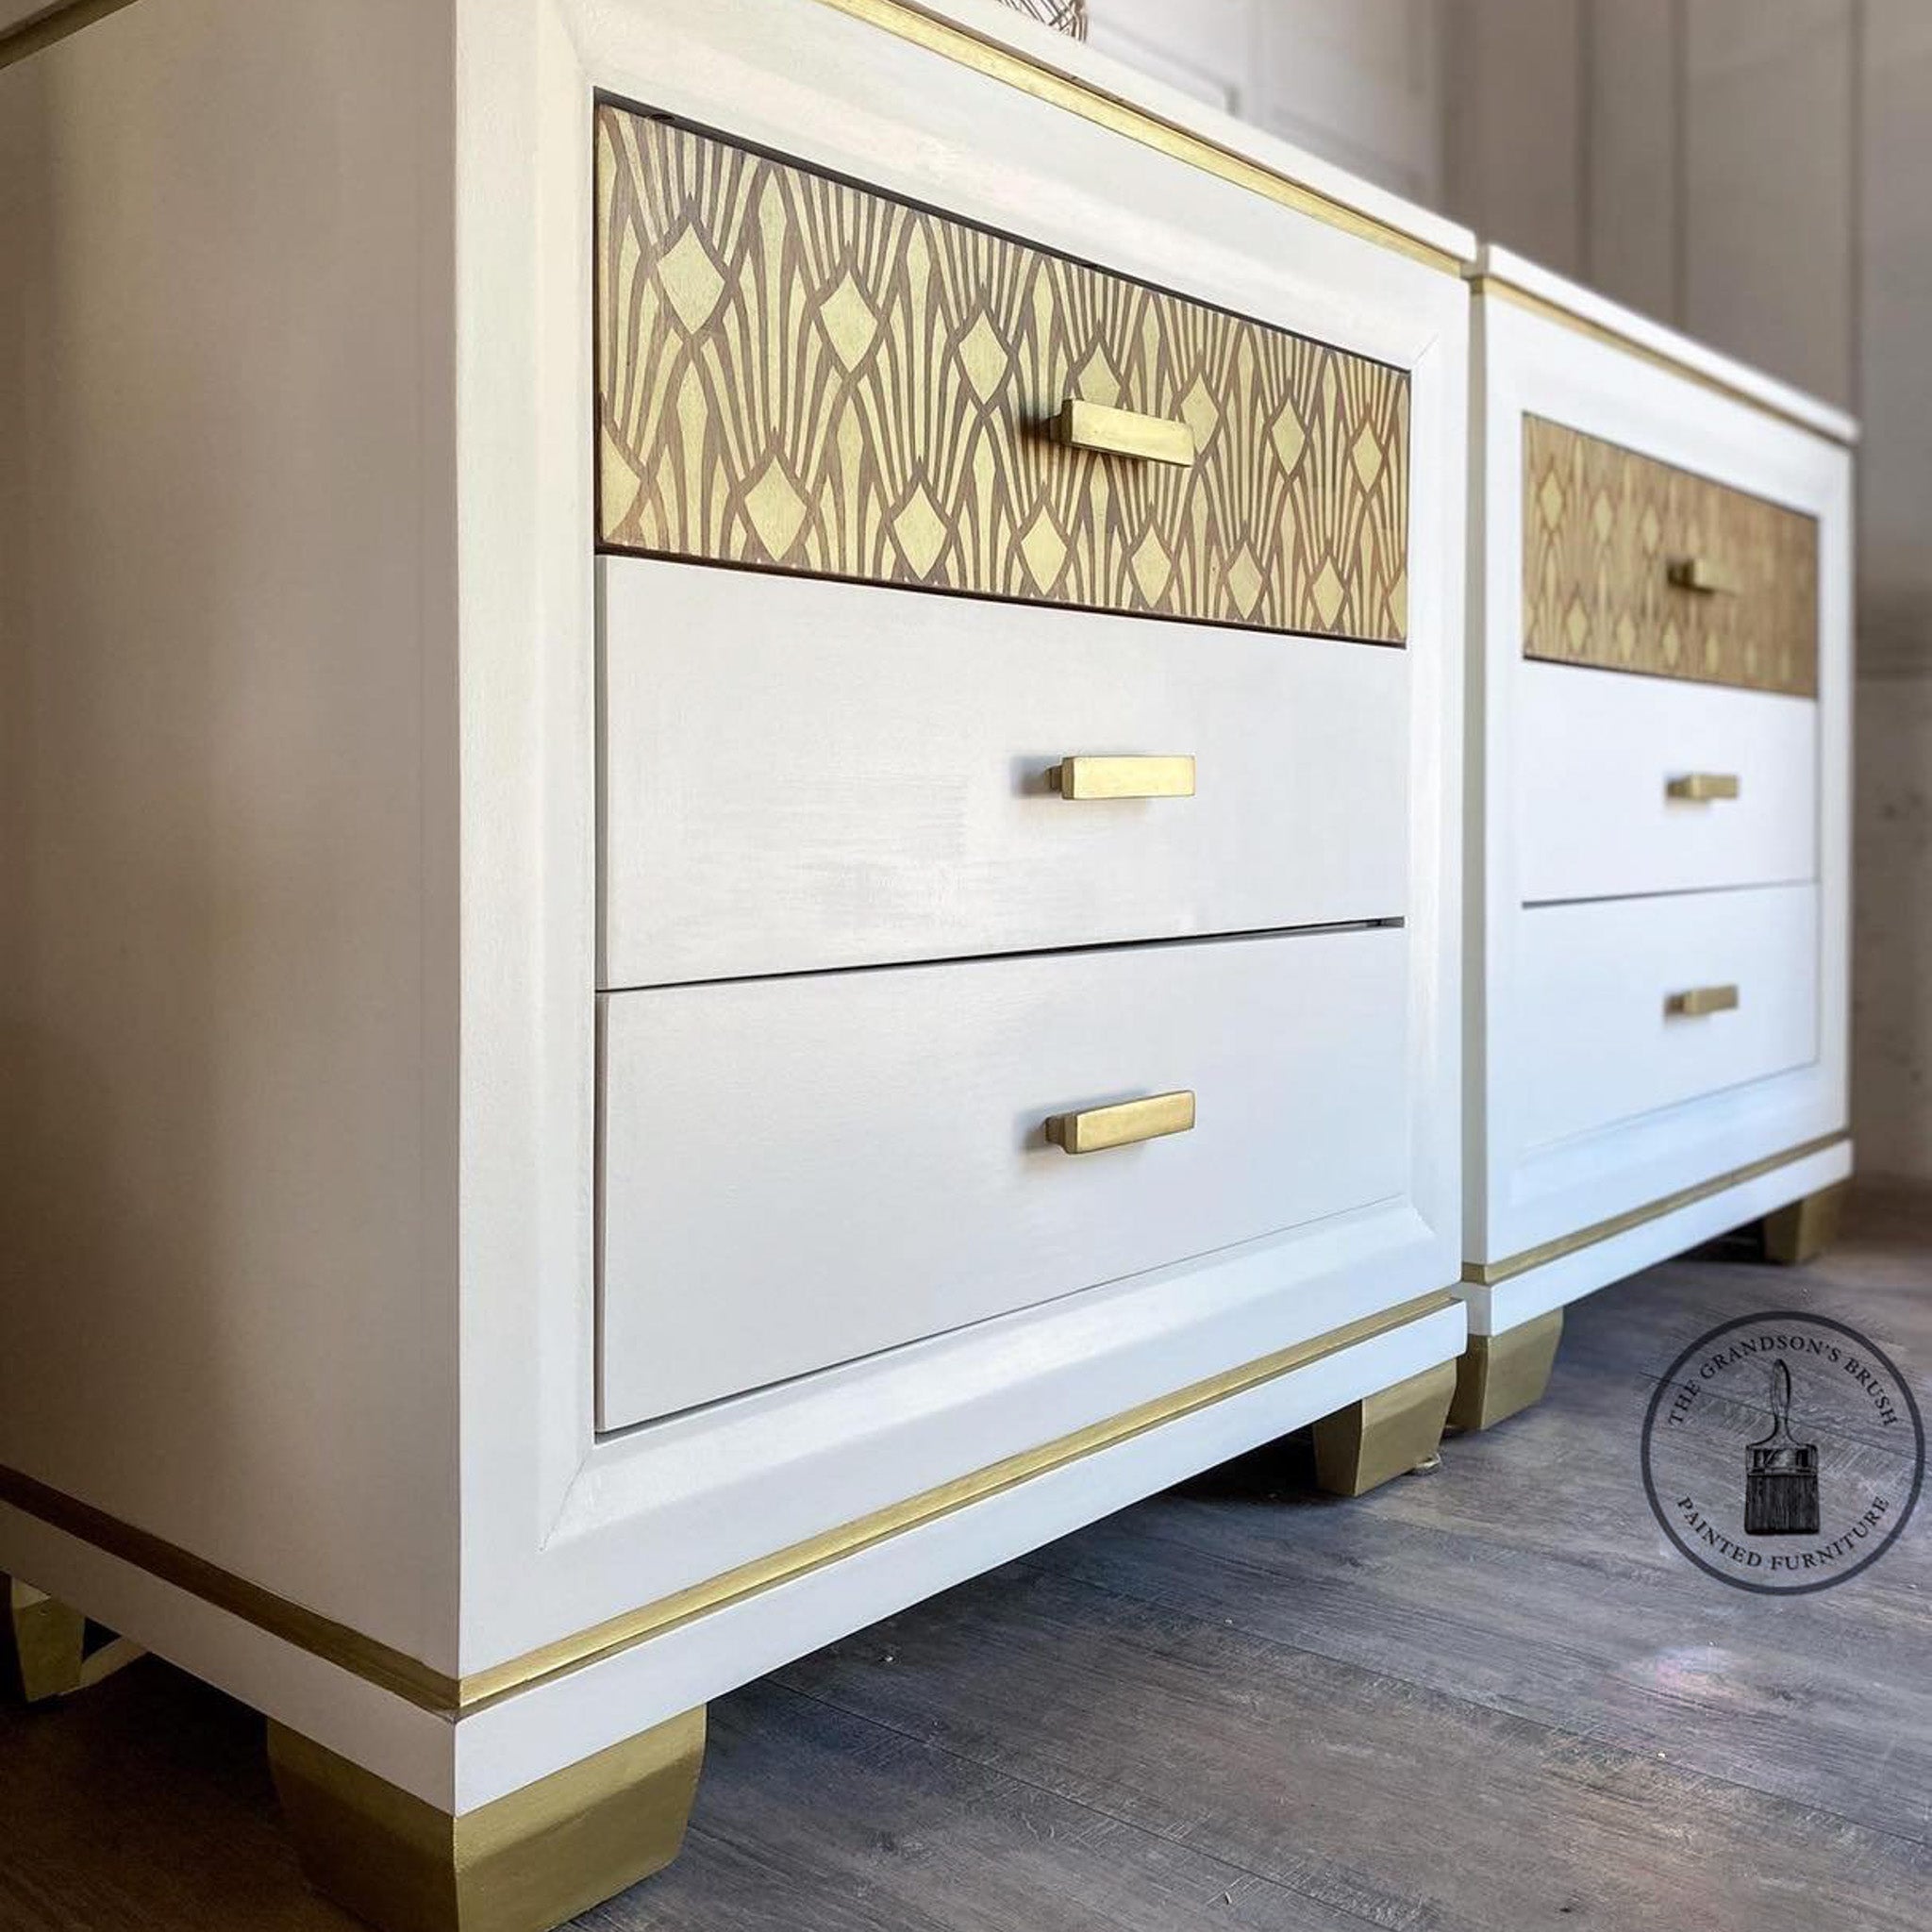 Close-up of 2 white with gold accented nightstands refurbished by The Grandson's Brush feature ReDesign with Prima's Sunlit Diamonds stencil in gold over brown.